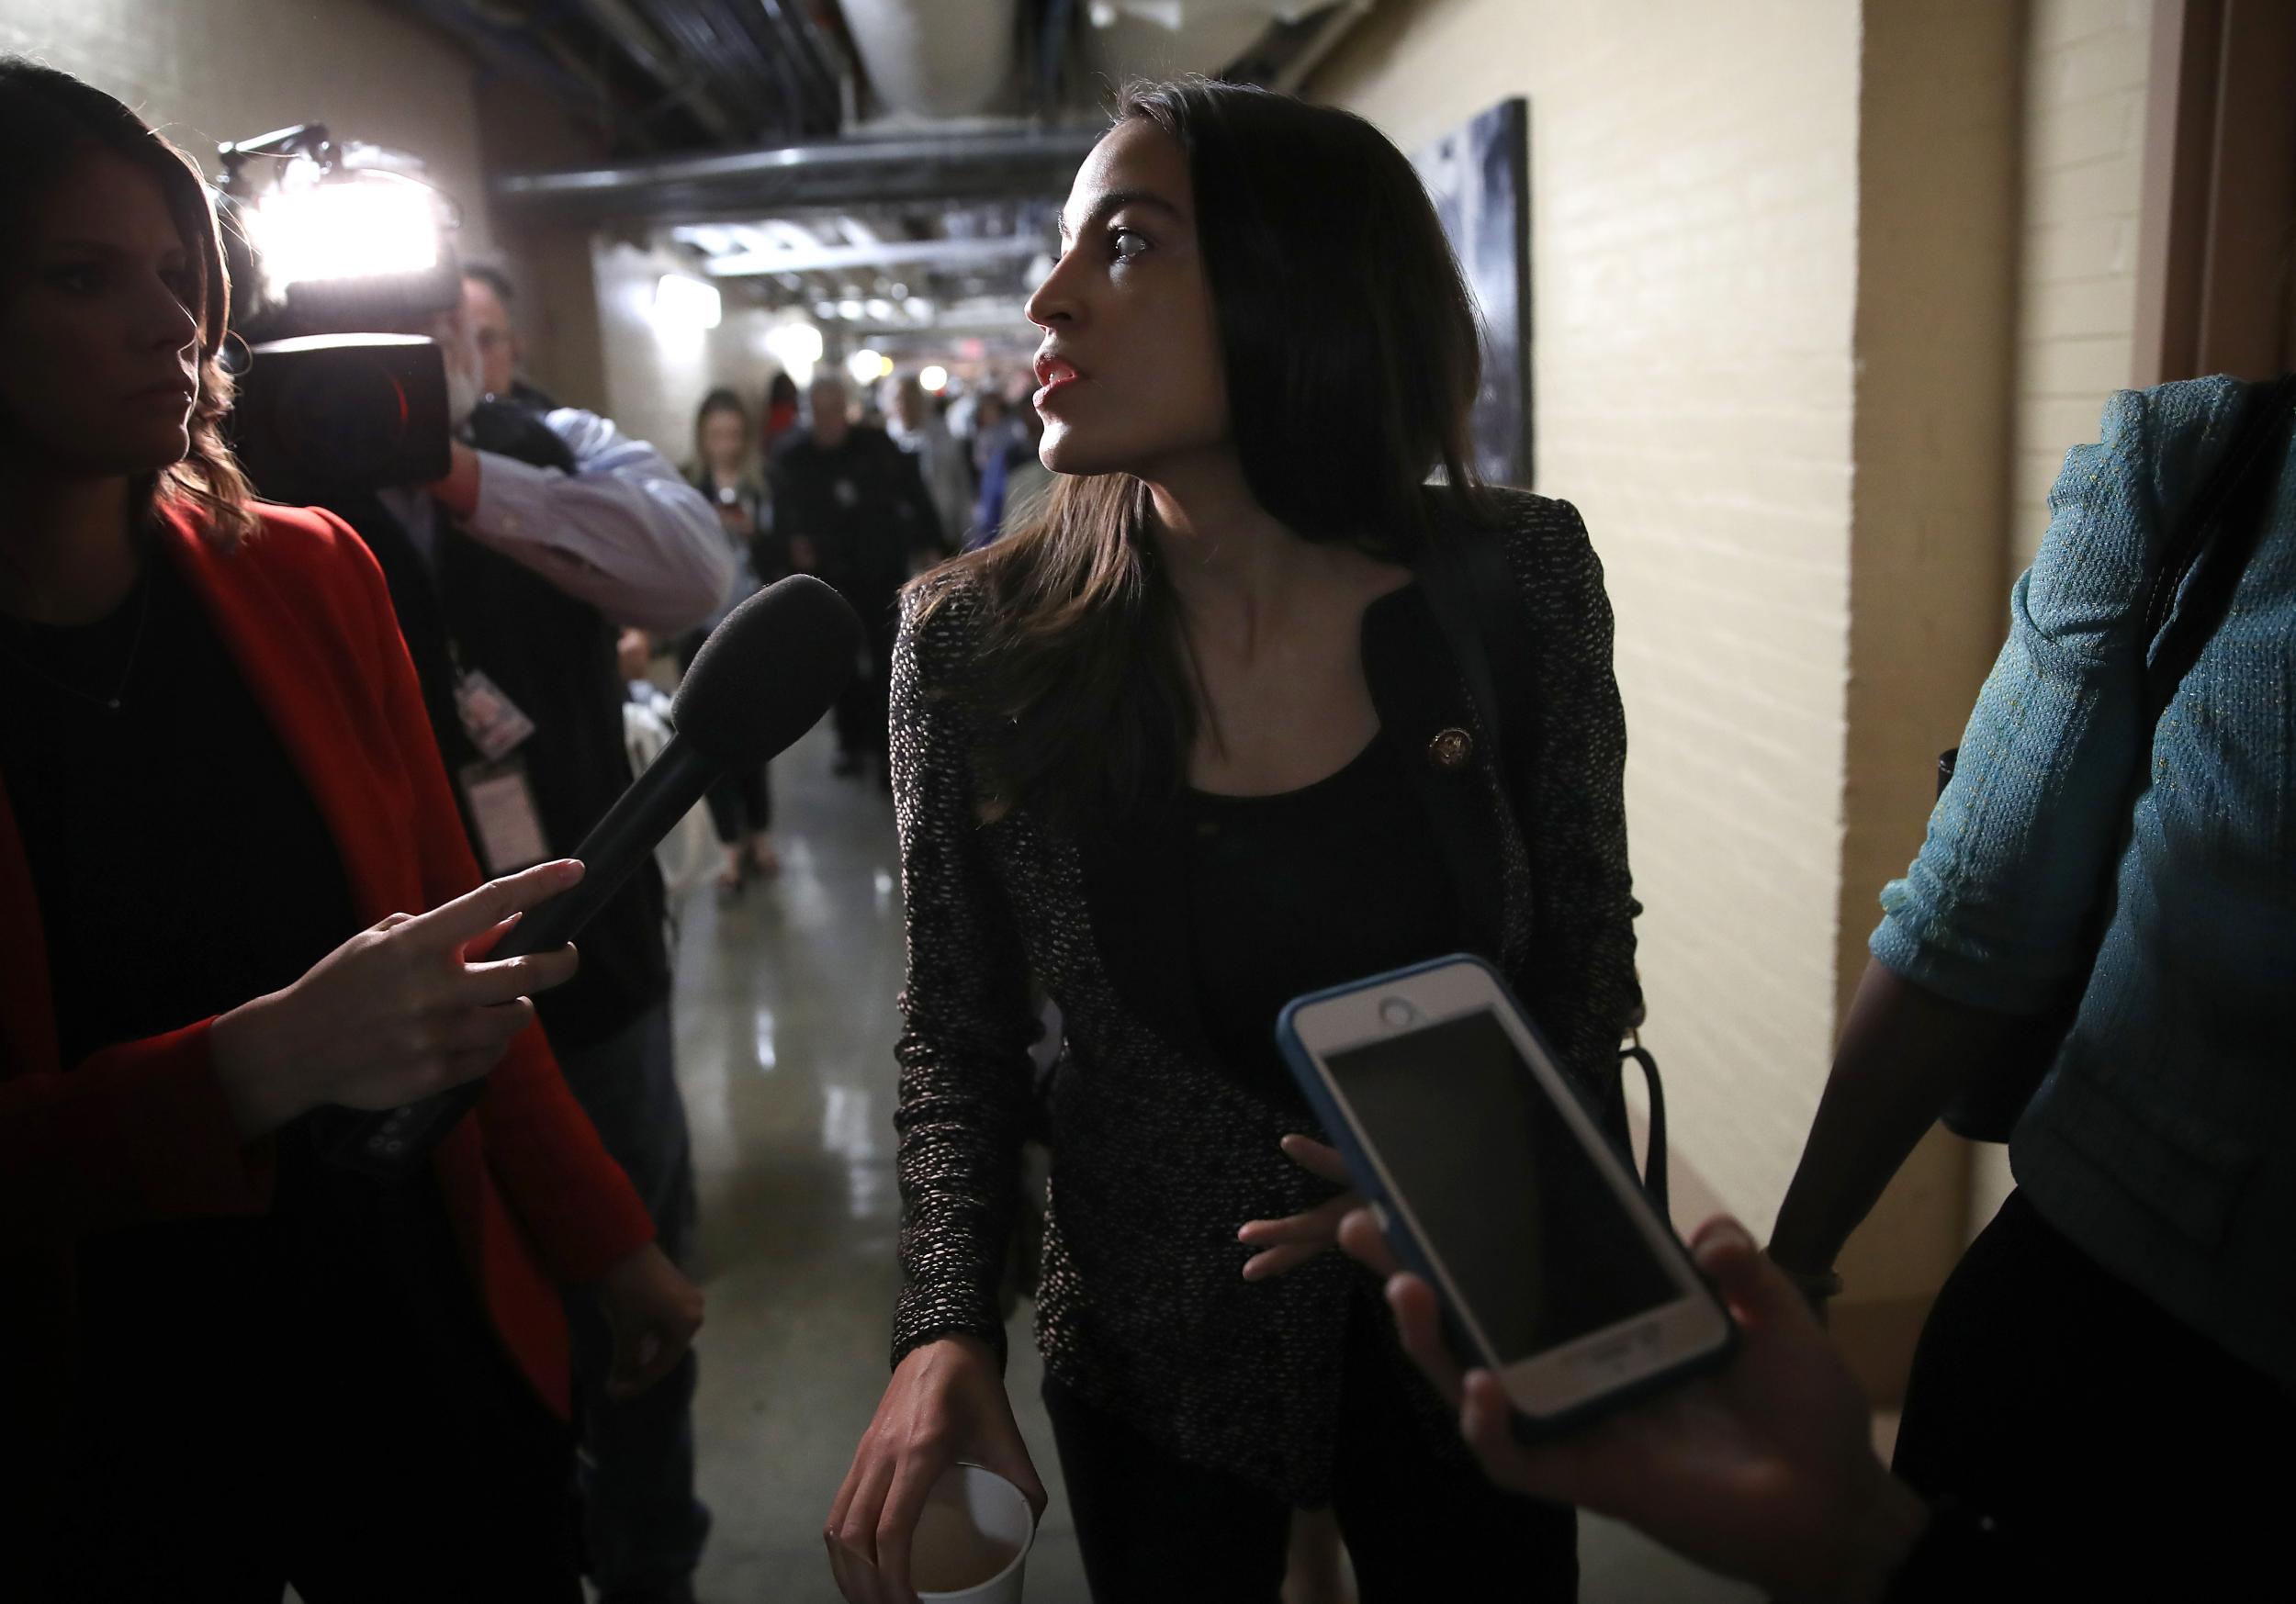 AOC says 'fascist' Trump administration is running 'concentration camps' on US-Mexico border